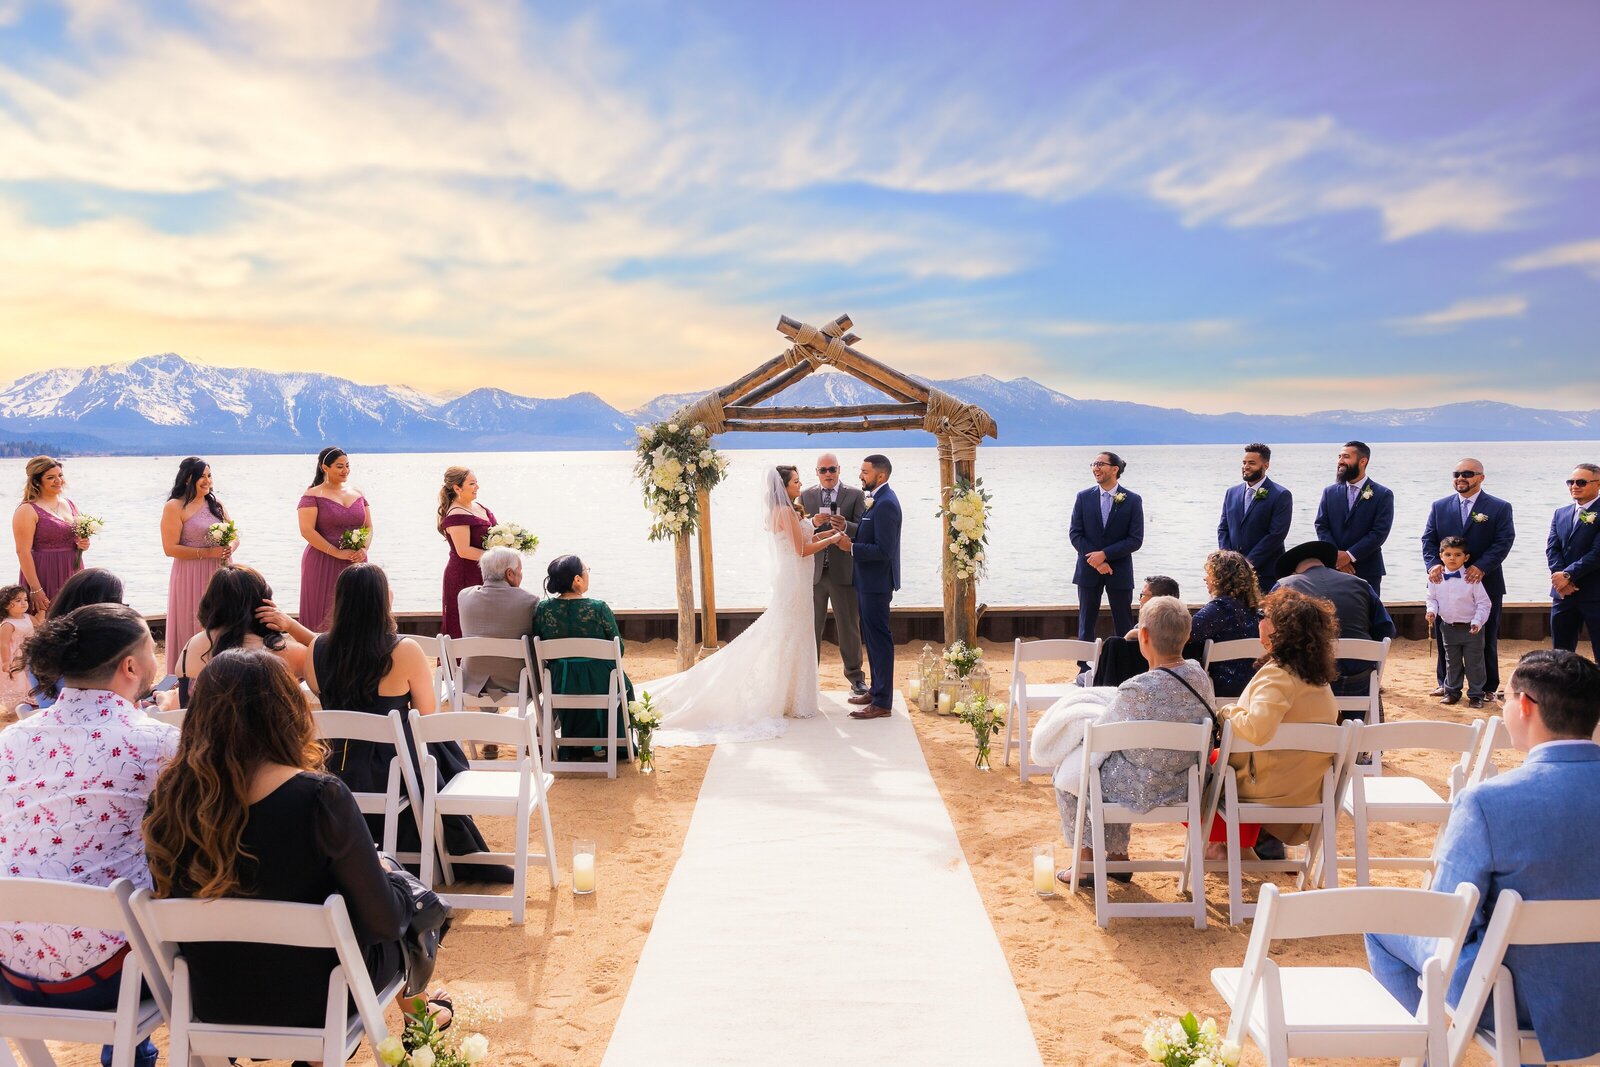 Bride and groom exchange vows in front of Lake Tahoe on the beach with guests looking on. Wedding photography studio, philippe studio pro captured the moment.